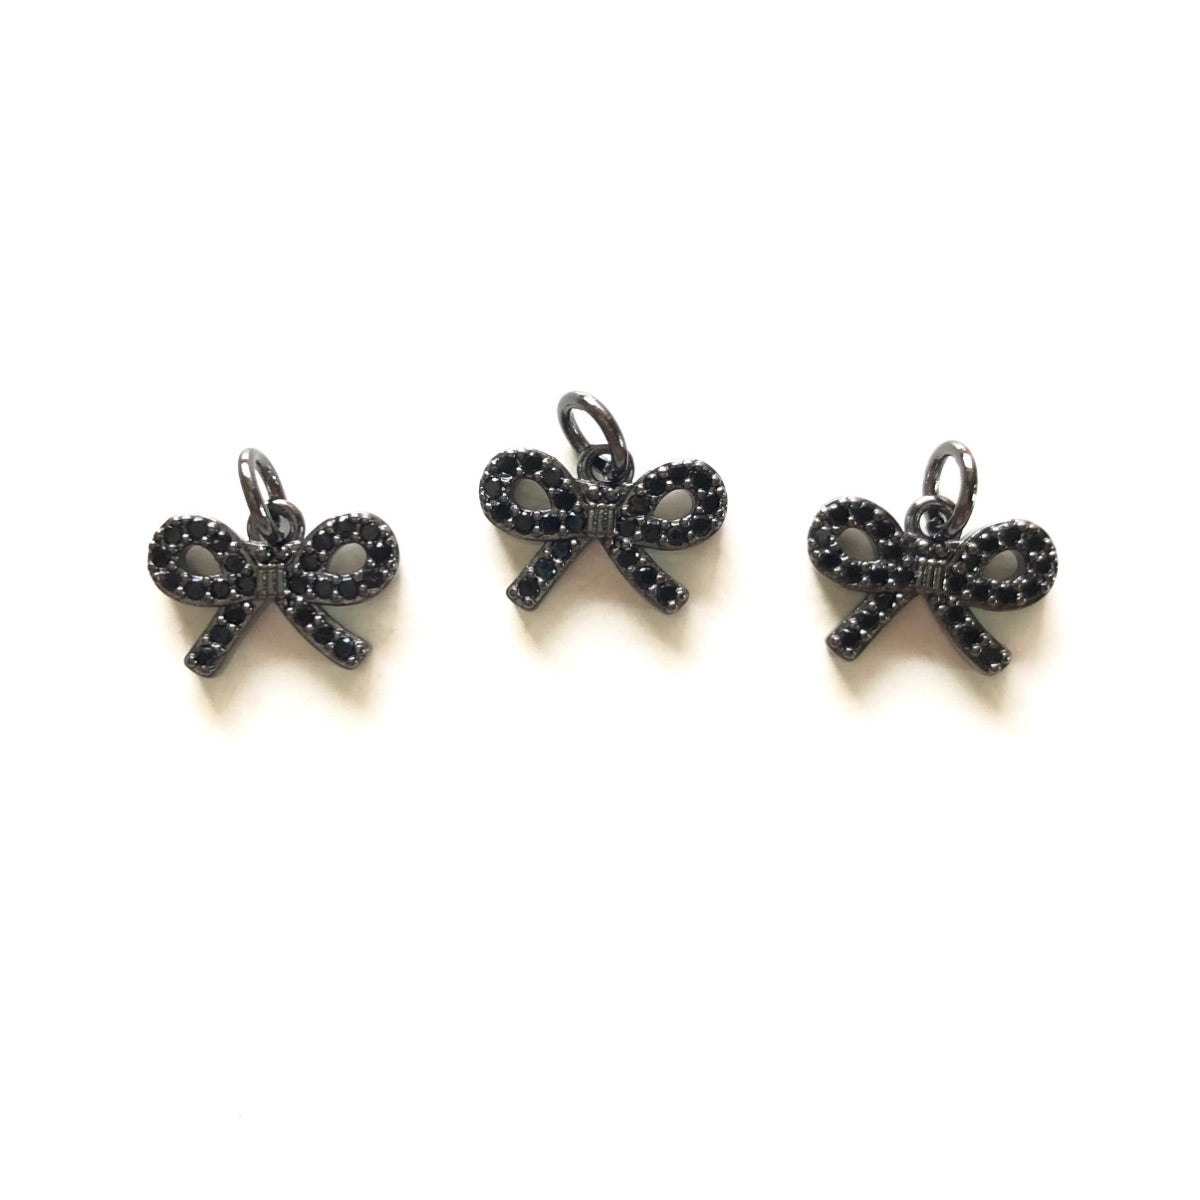 10pcs/lot 12.3*9mm Small Size CZ Pave Bow Tie Charms Black on Black CZ Paved Charms Bow Ties Small Sizes Charms Beads Beyond